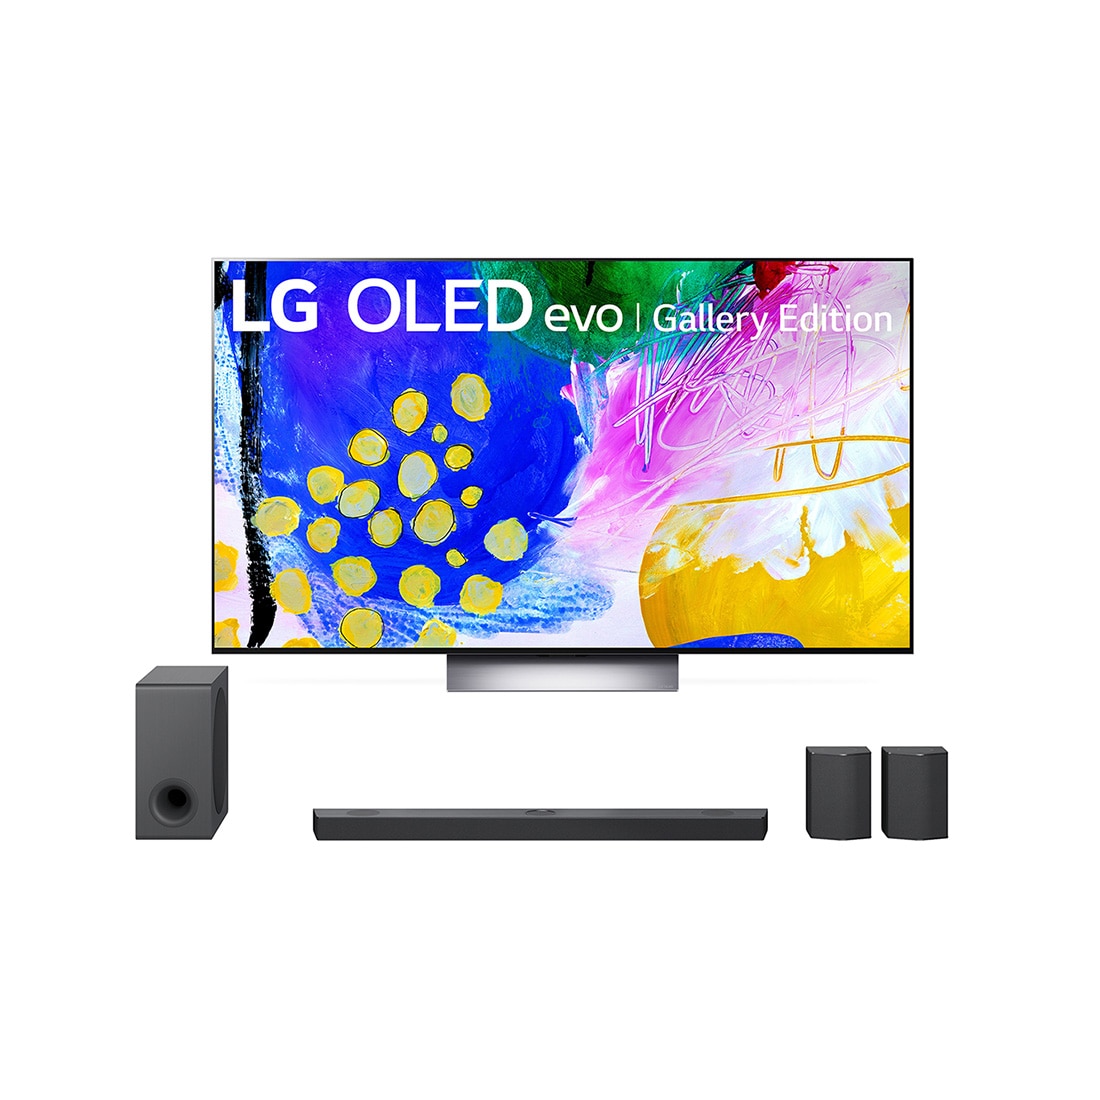 LG Home Package with OLED TV and S95QR Sound Bar with Surround Speakers (OLED77G2PUA-S95QR) | LG USA